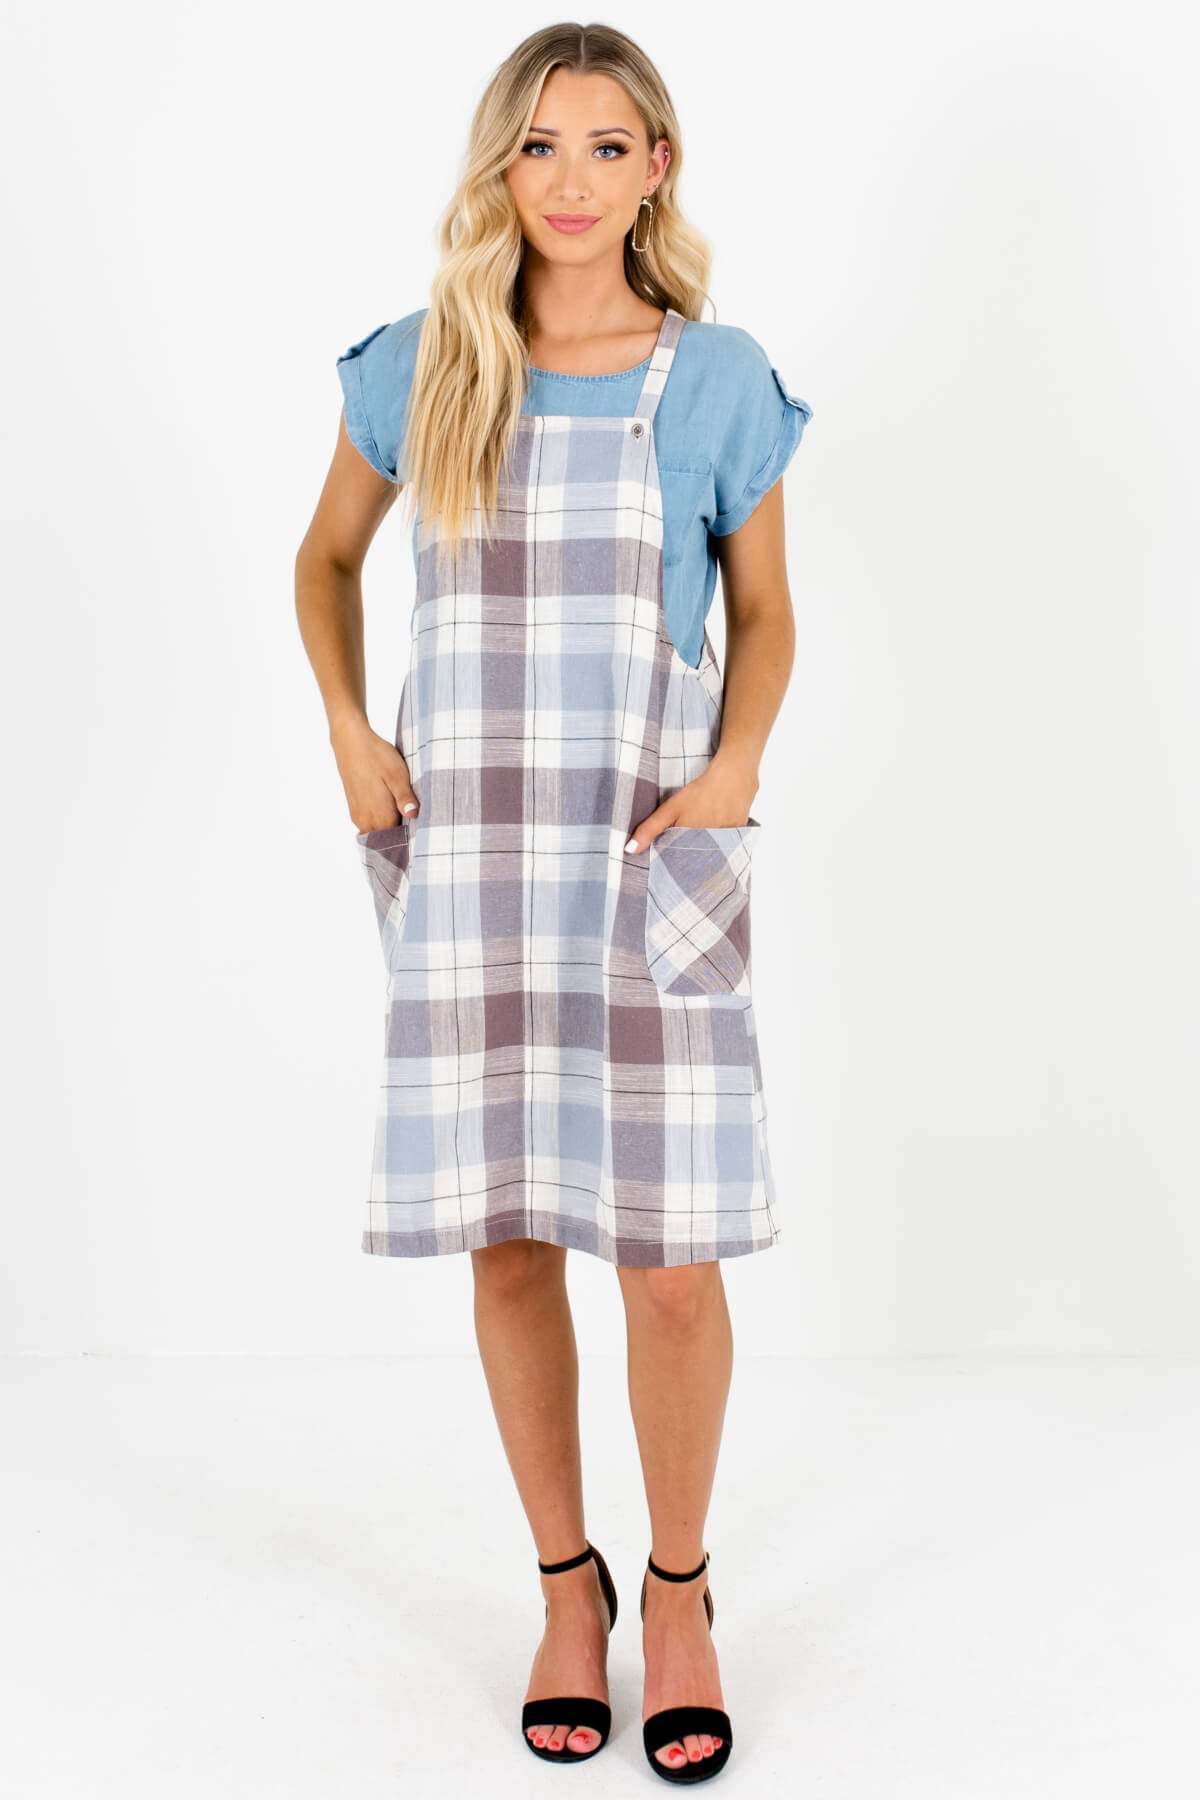 Blue Cream Brown Plaid Knee-Length Overall Dresses with Pockets